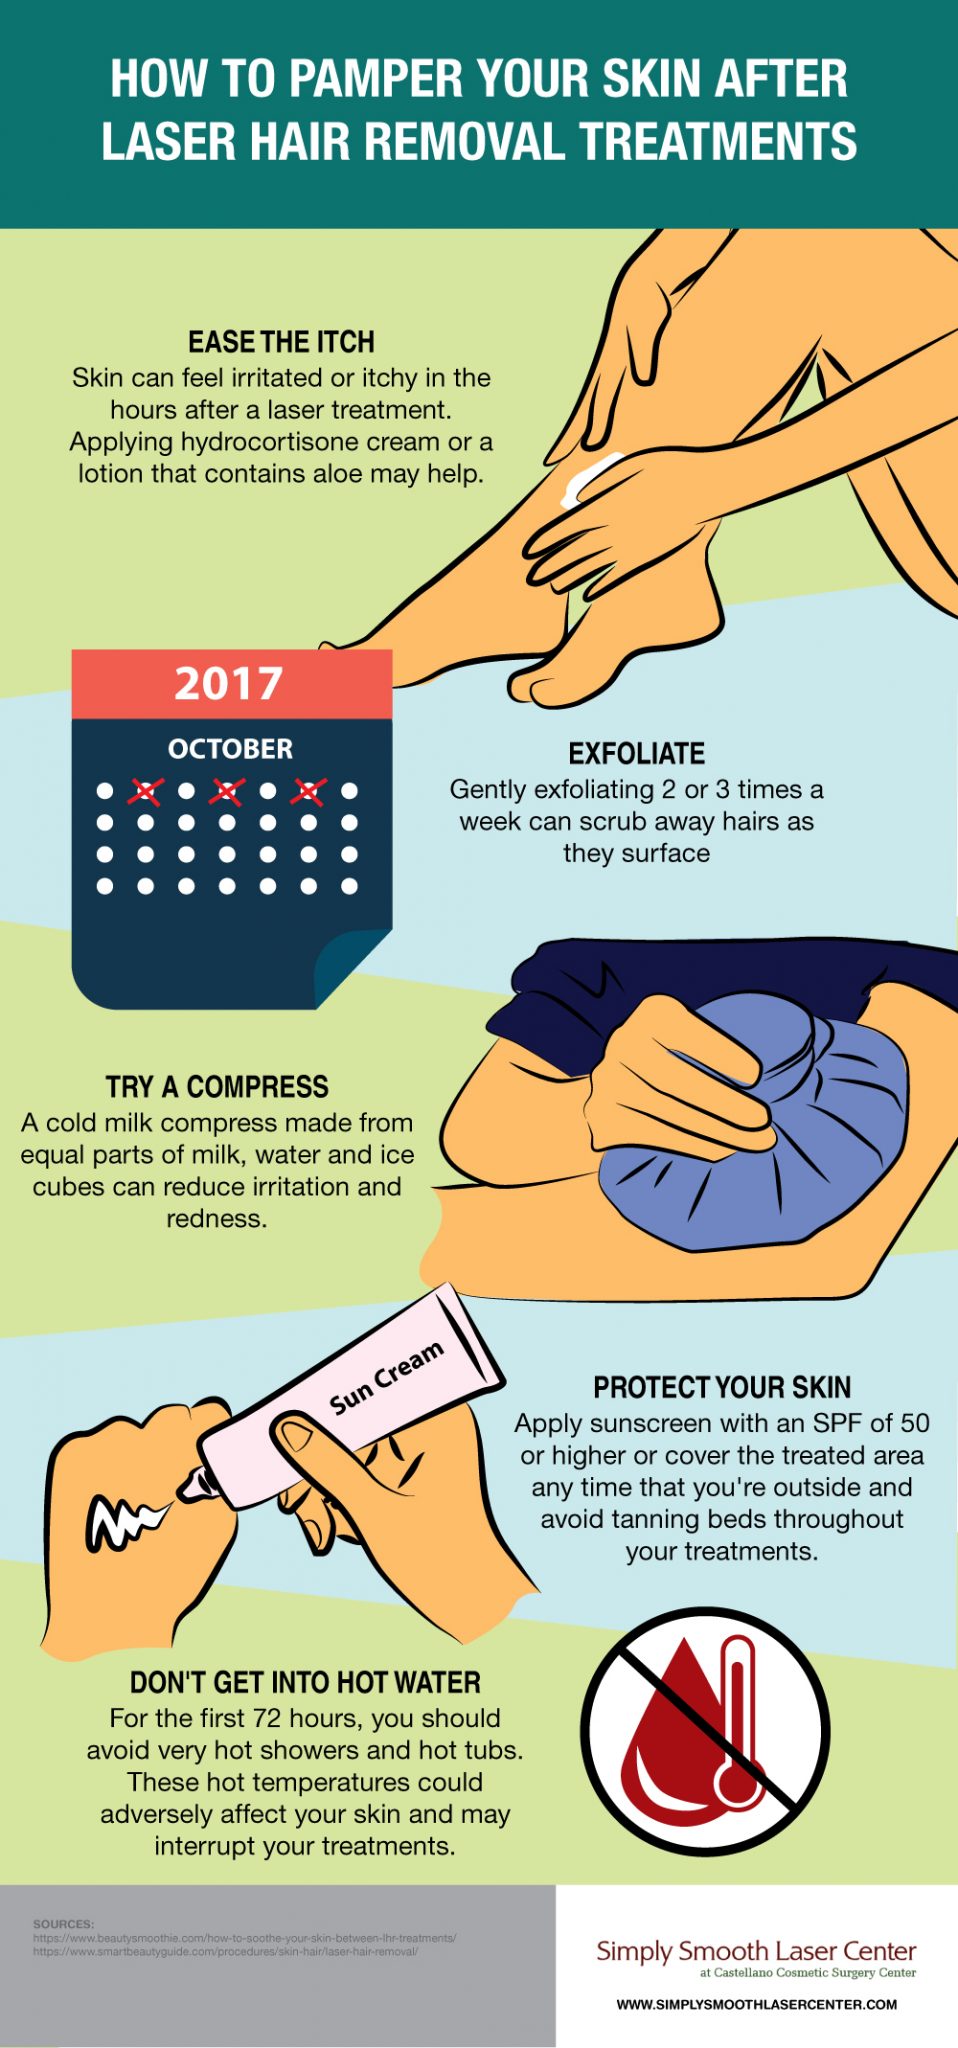 How to Pamper Your Skin after Laser Hair Removal [Infographic]